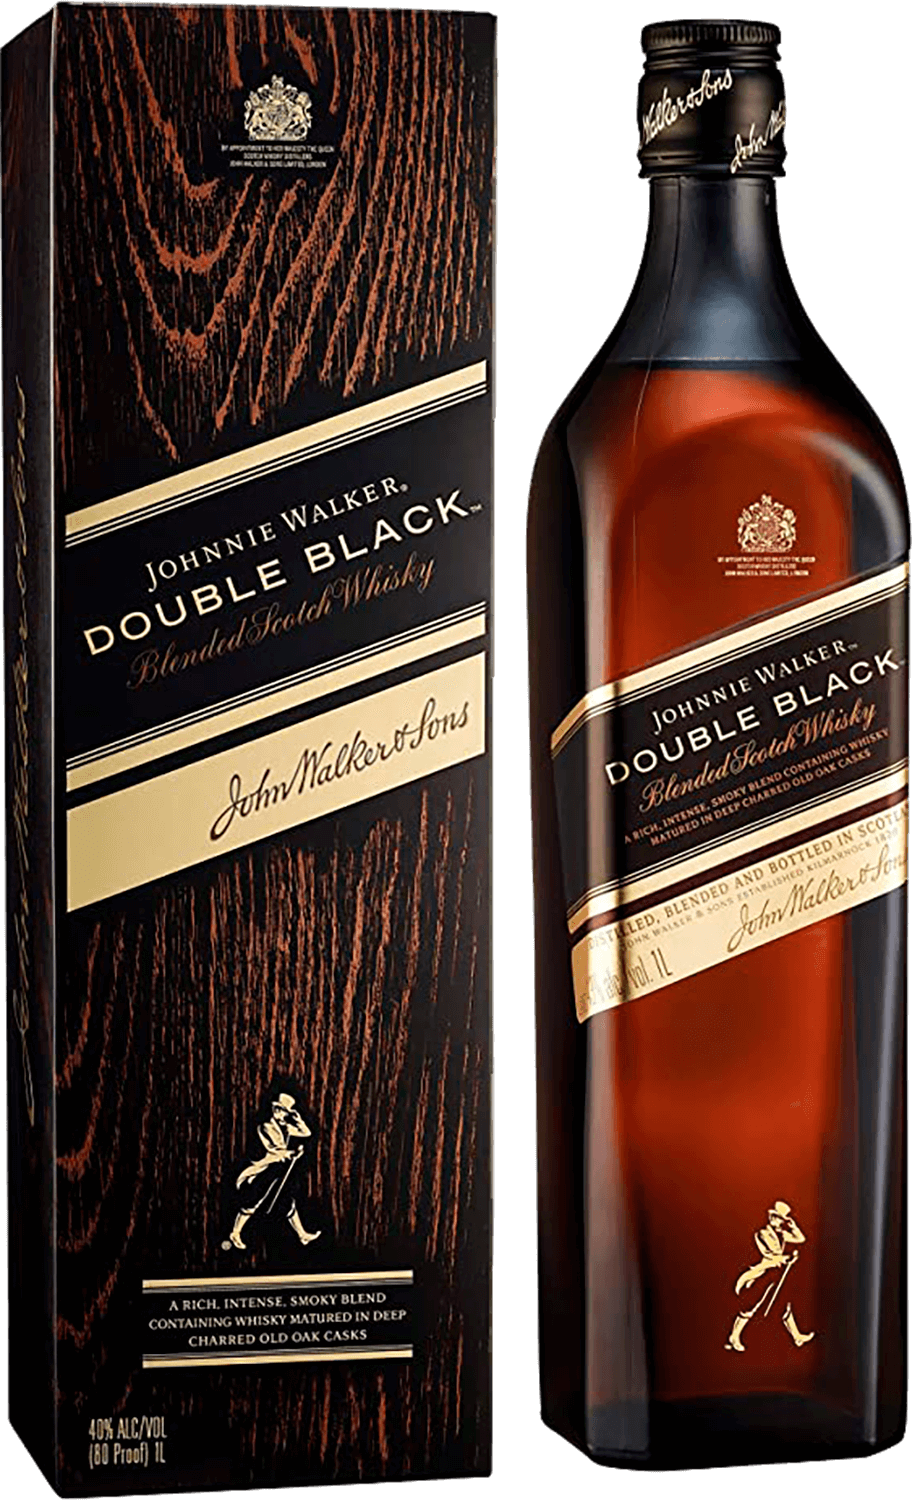 Johnnie Walker Double Black Blended Scotch Whisky (gift box) johnnie walker 18 y o blended scotch whisky gift box